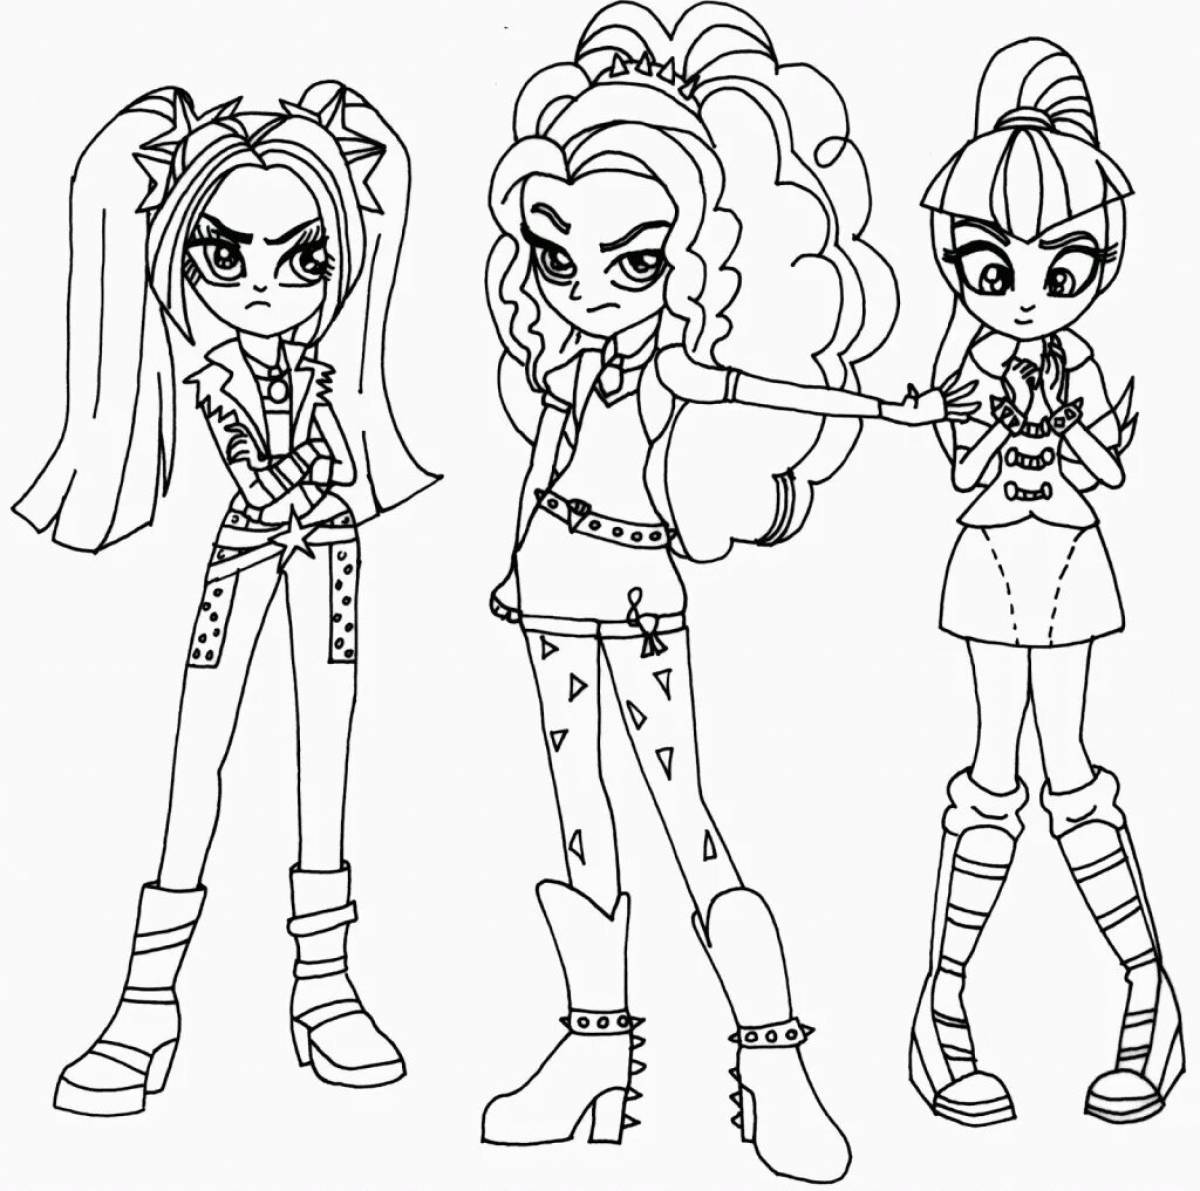 Inspirational equestria girls coloring pages